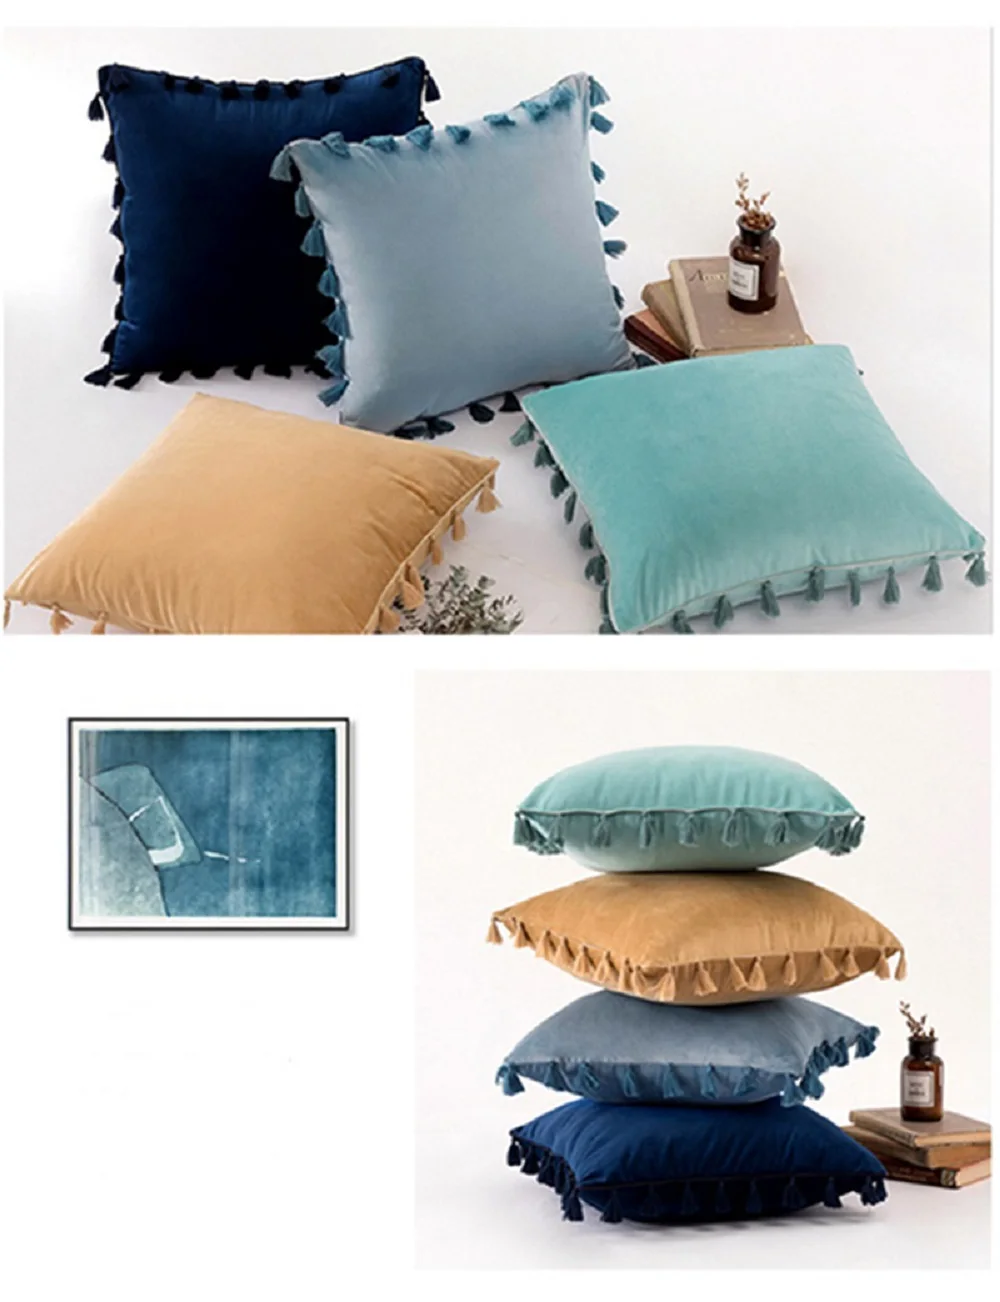 Inyahome Water Blue Velvet Soft Solid Decorative Throw Pillow Cover with Tassels Fringe Boho Cushion Case for Couch Sofa Bed